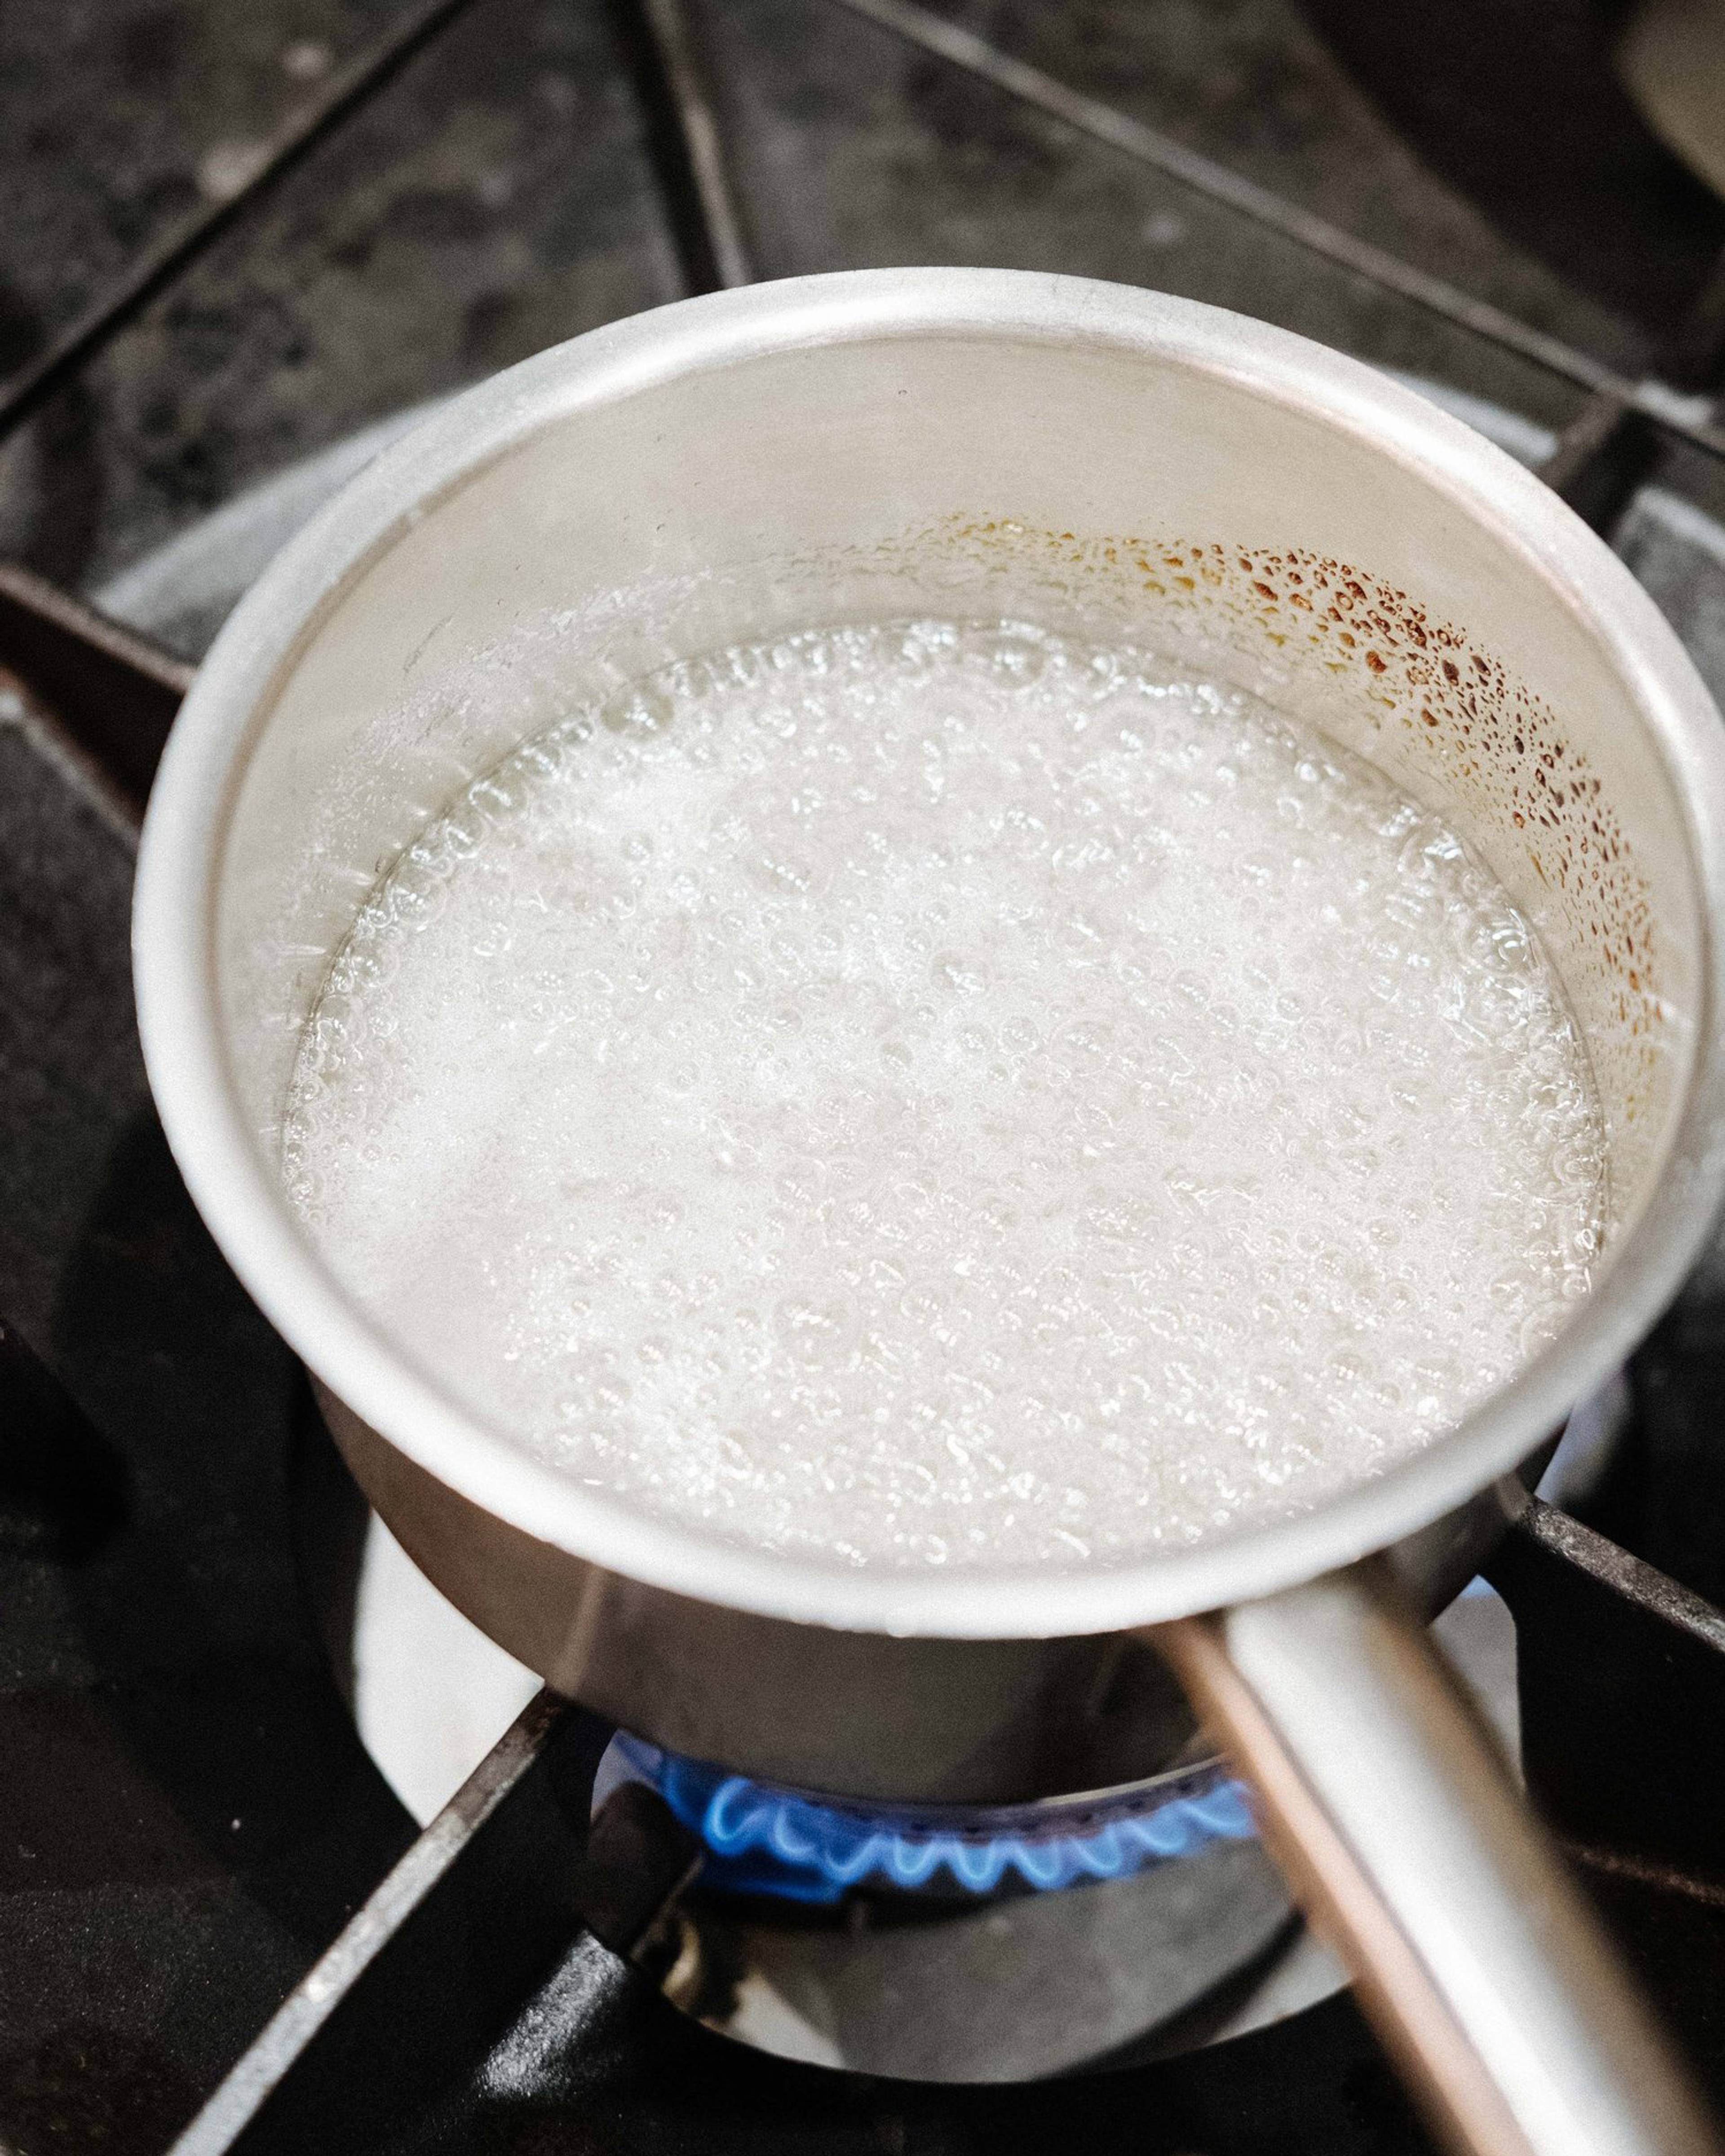 Dissolving the sugar in boiling water